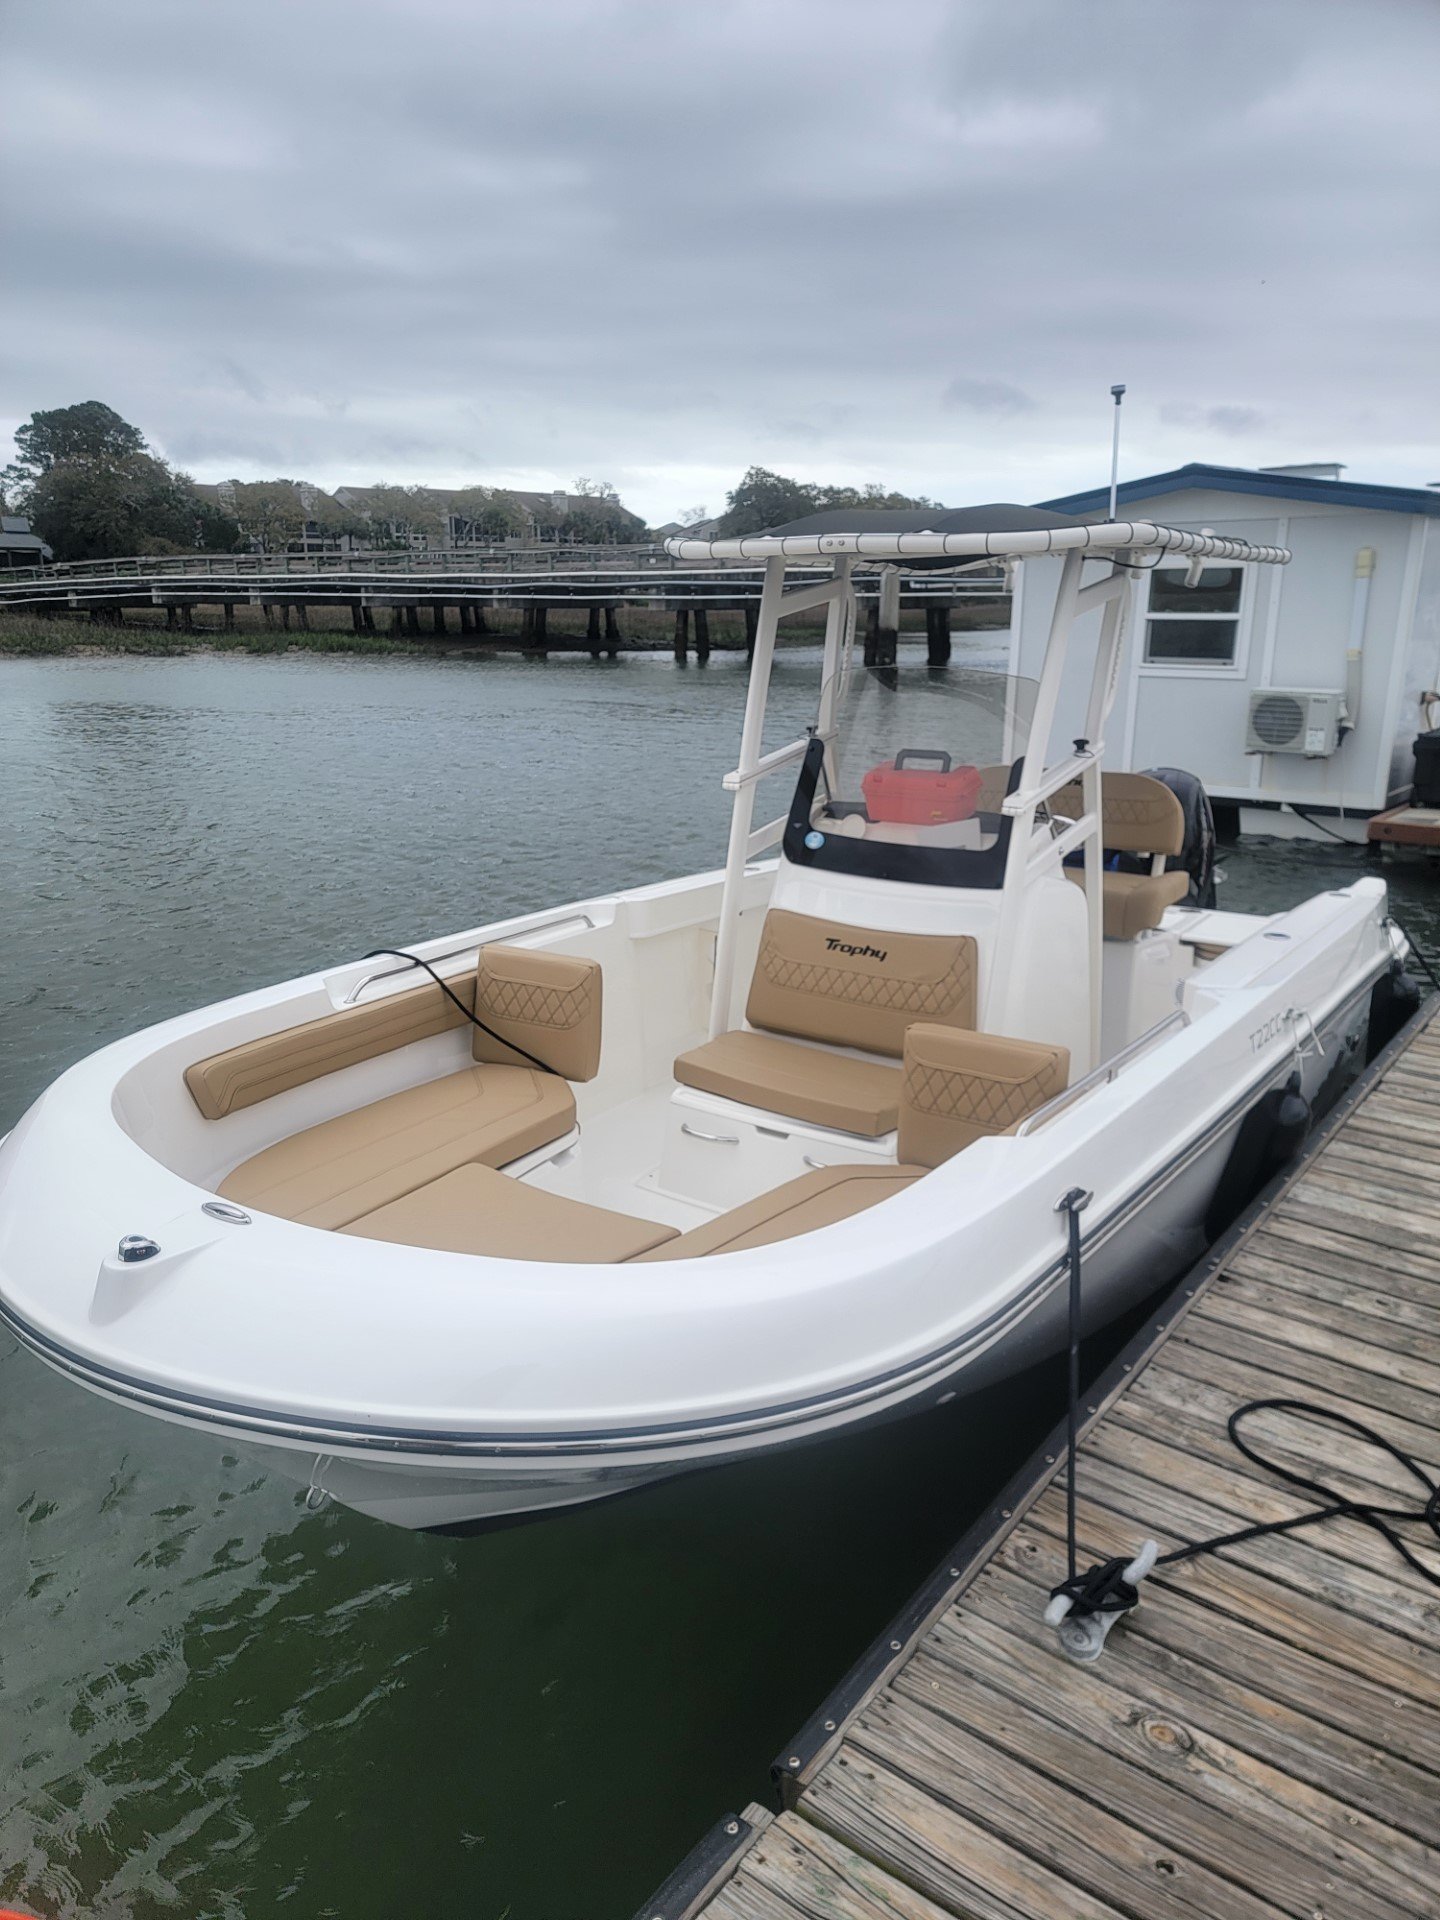 Island Freedom 2 (22FT Bayliner Trophy 22 Center Console - 150 HP~Fishing)